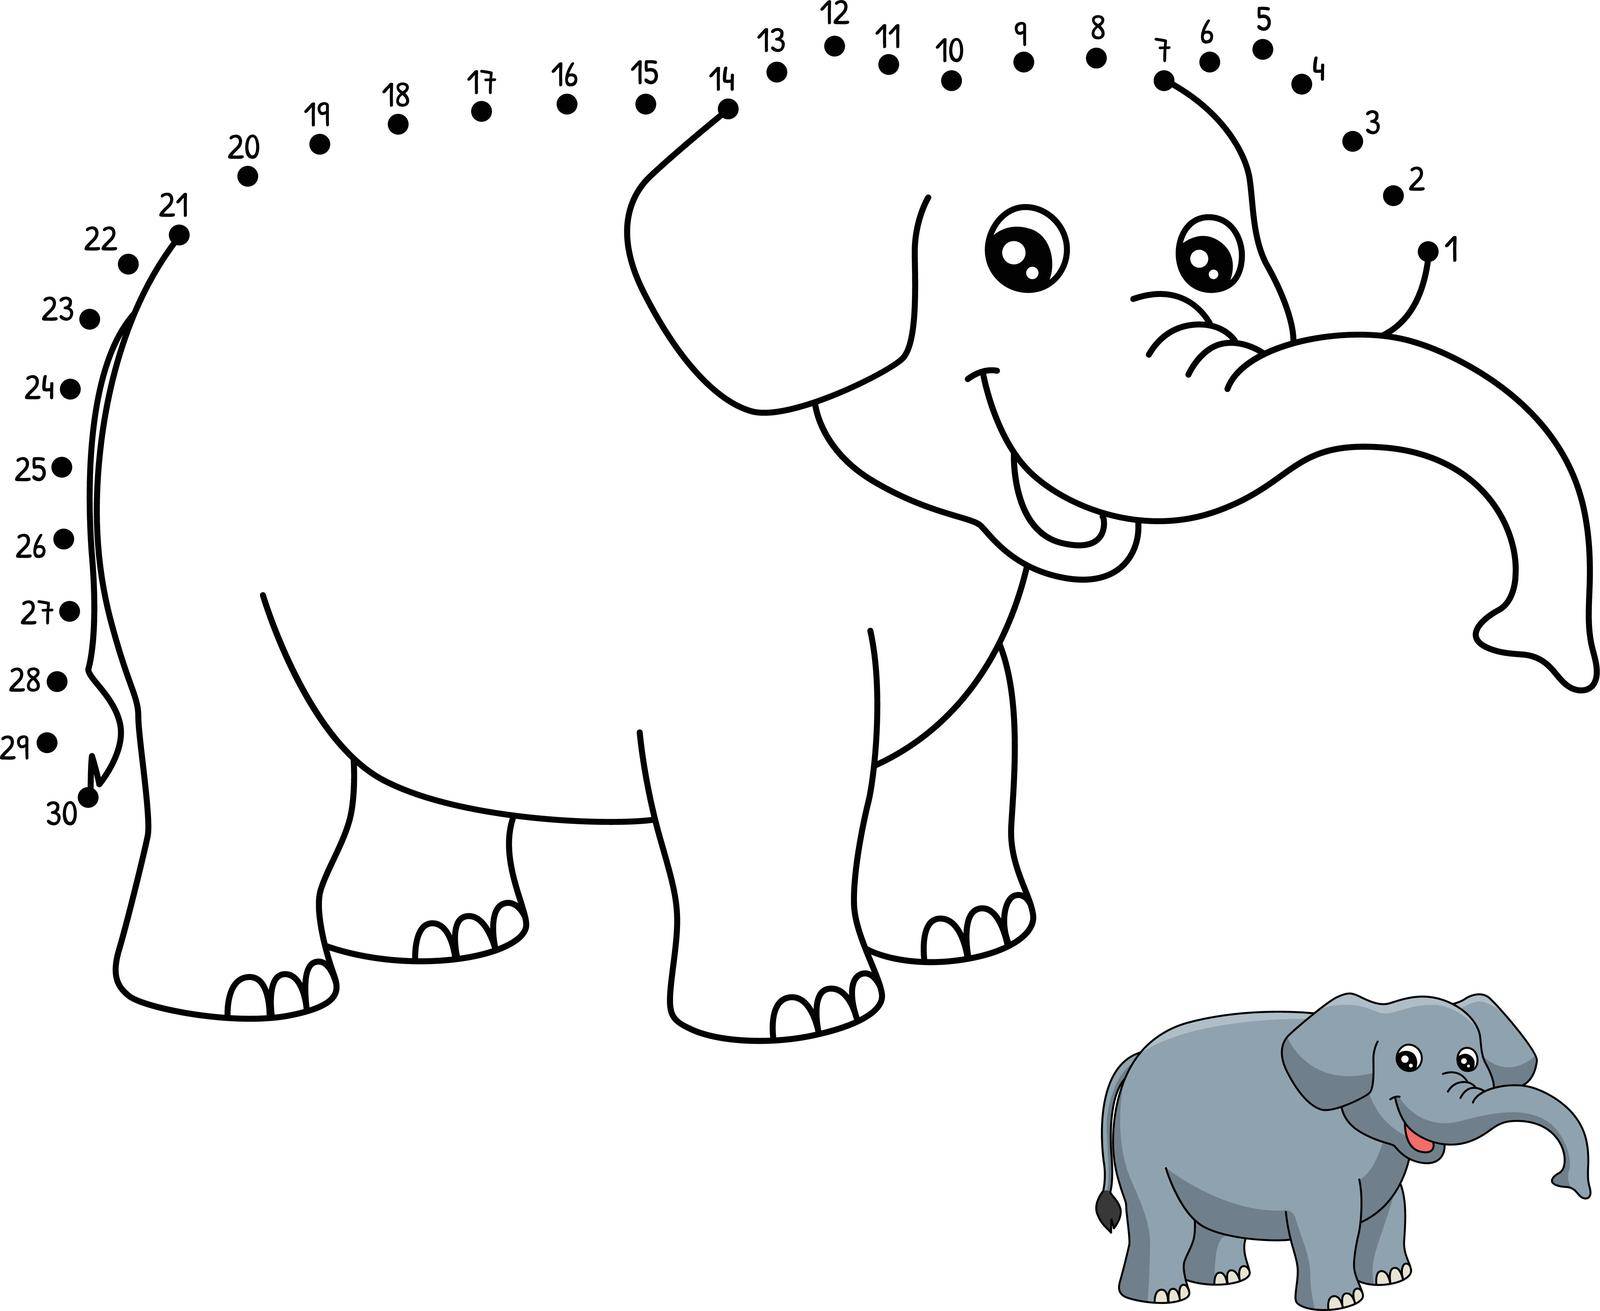 A cute and funny connect-the-dots coloring page of an Elephant. Provides hours of coloring fun for children. Color, this page is very easy. Suitable for little kids and toddlers.